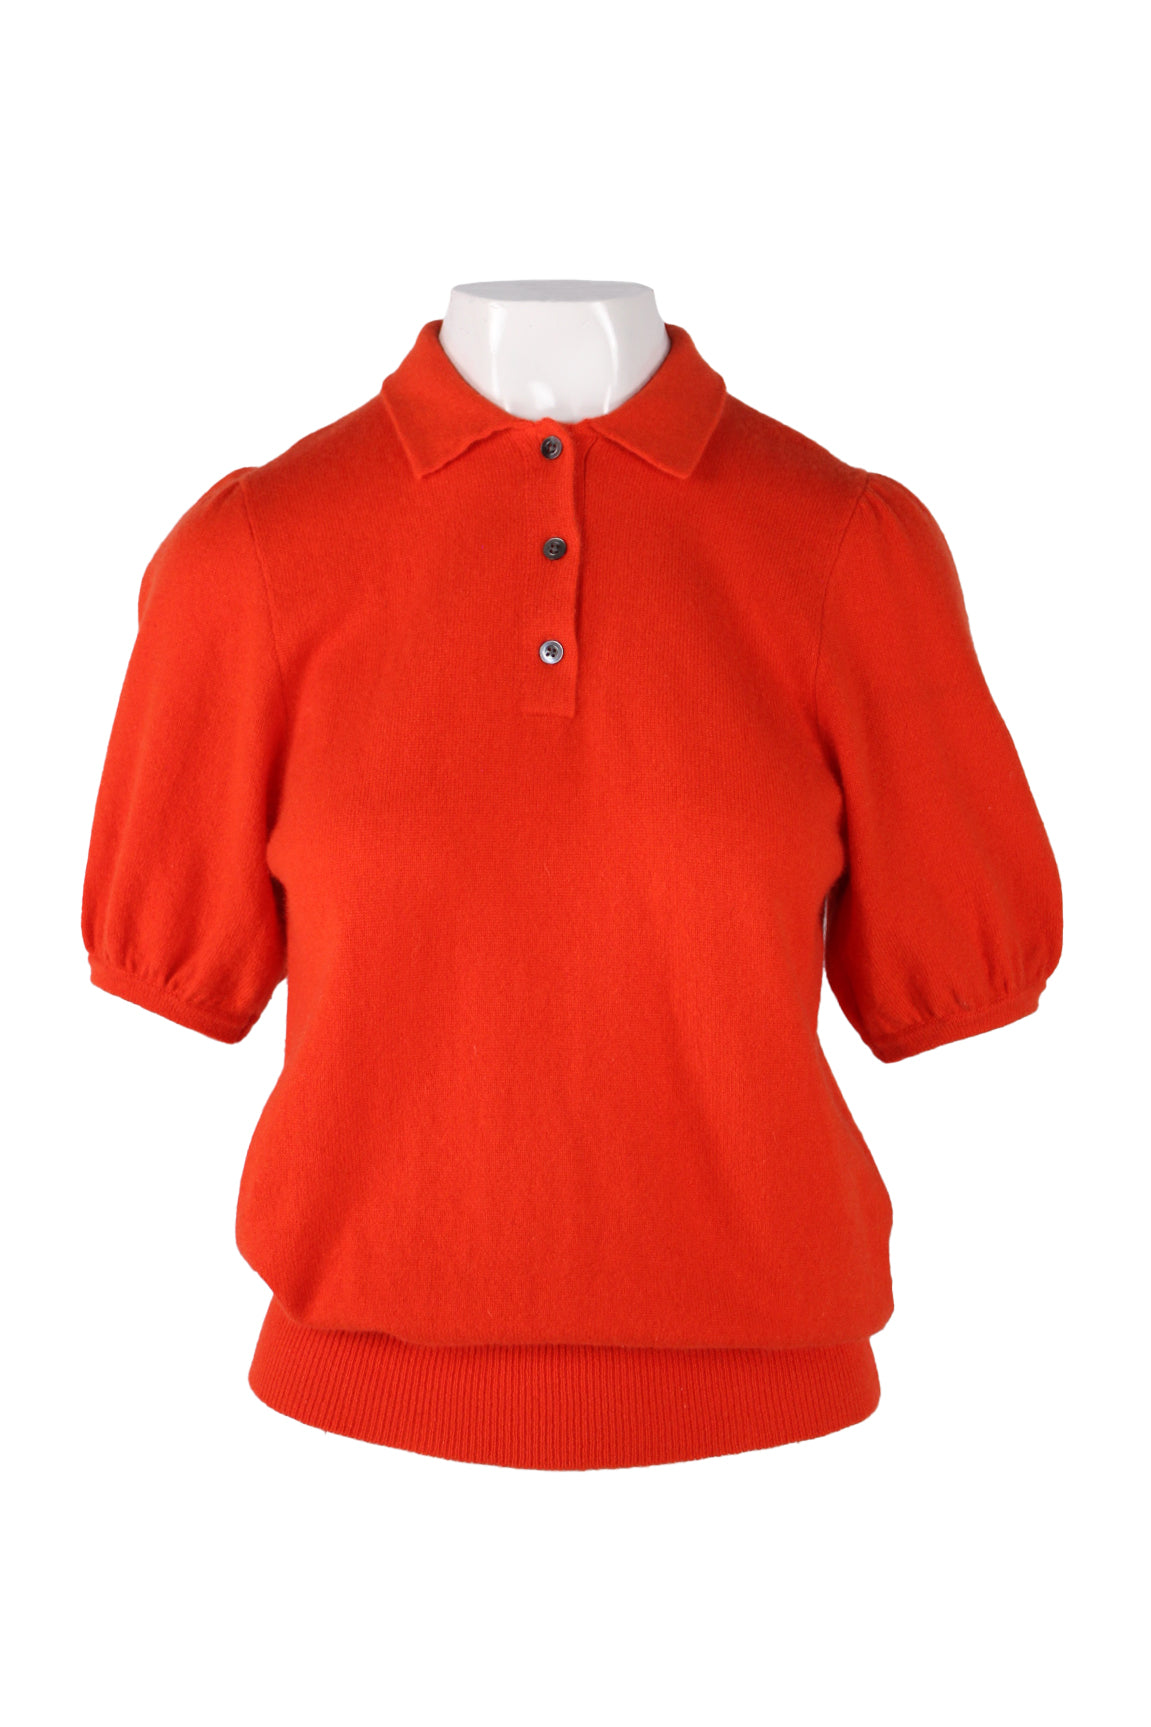 description: demylee orange cashmere short sleeve sweater. features collar, button closure, slight balloon sleeve, and fitted ribbed bottom hem. 